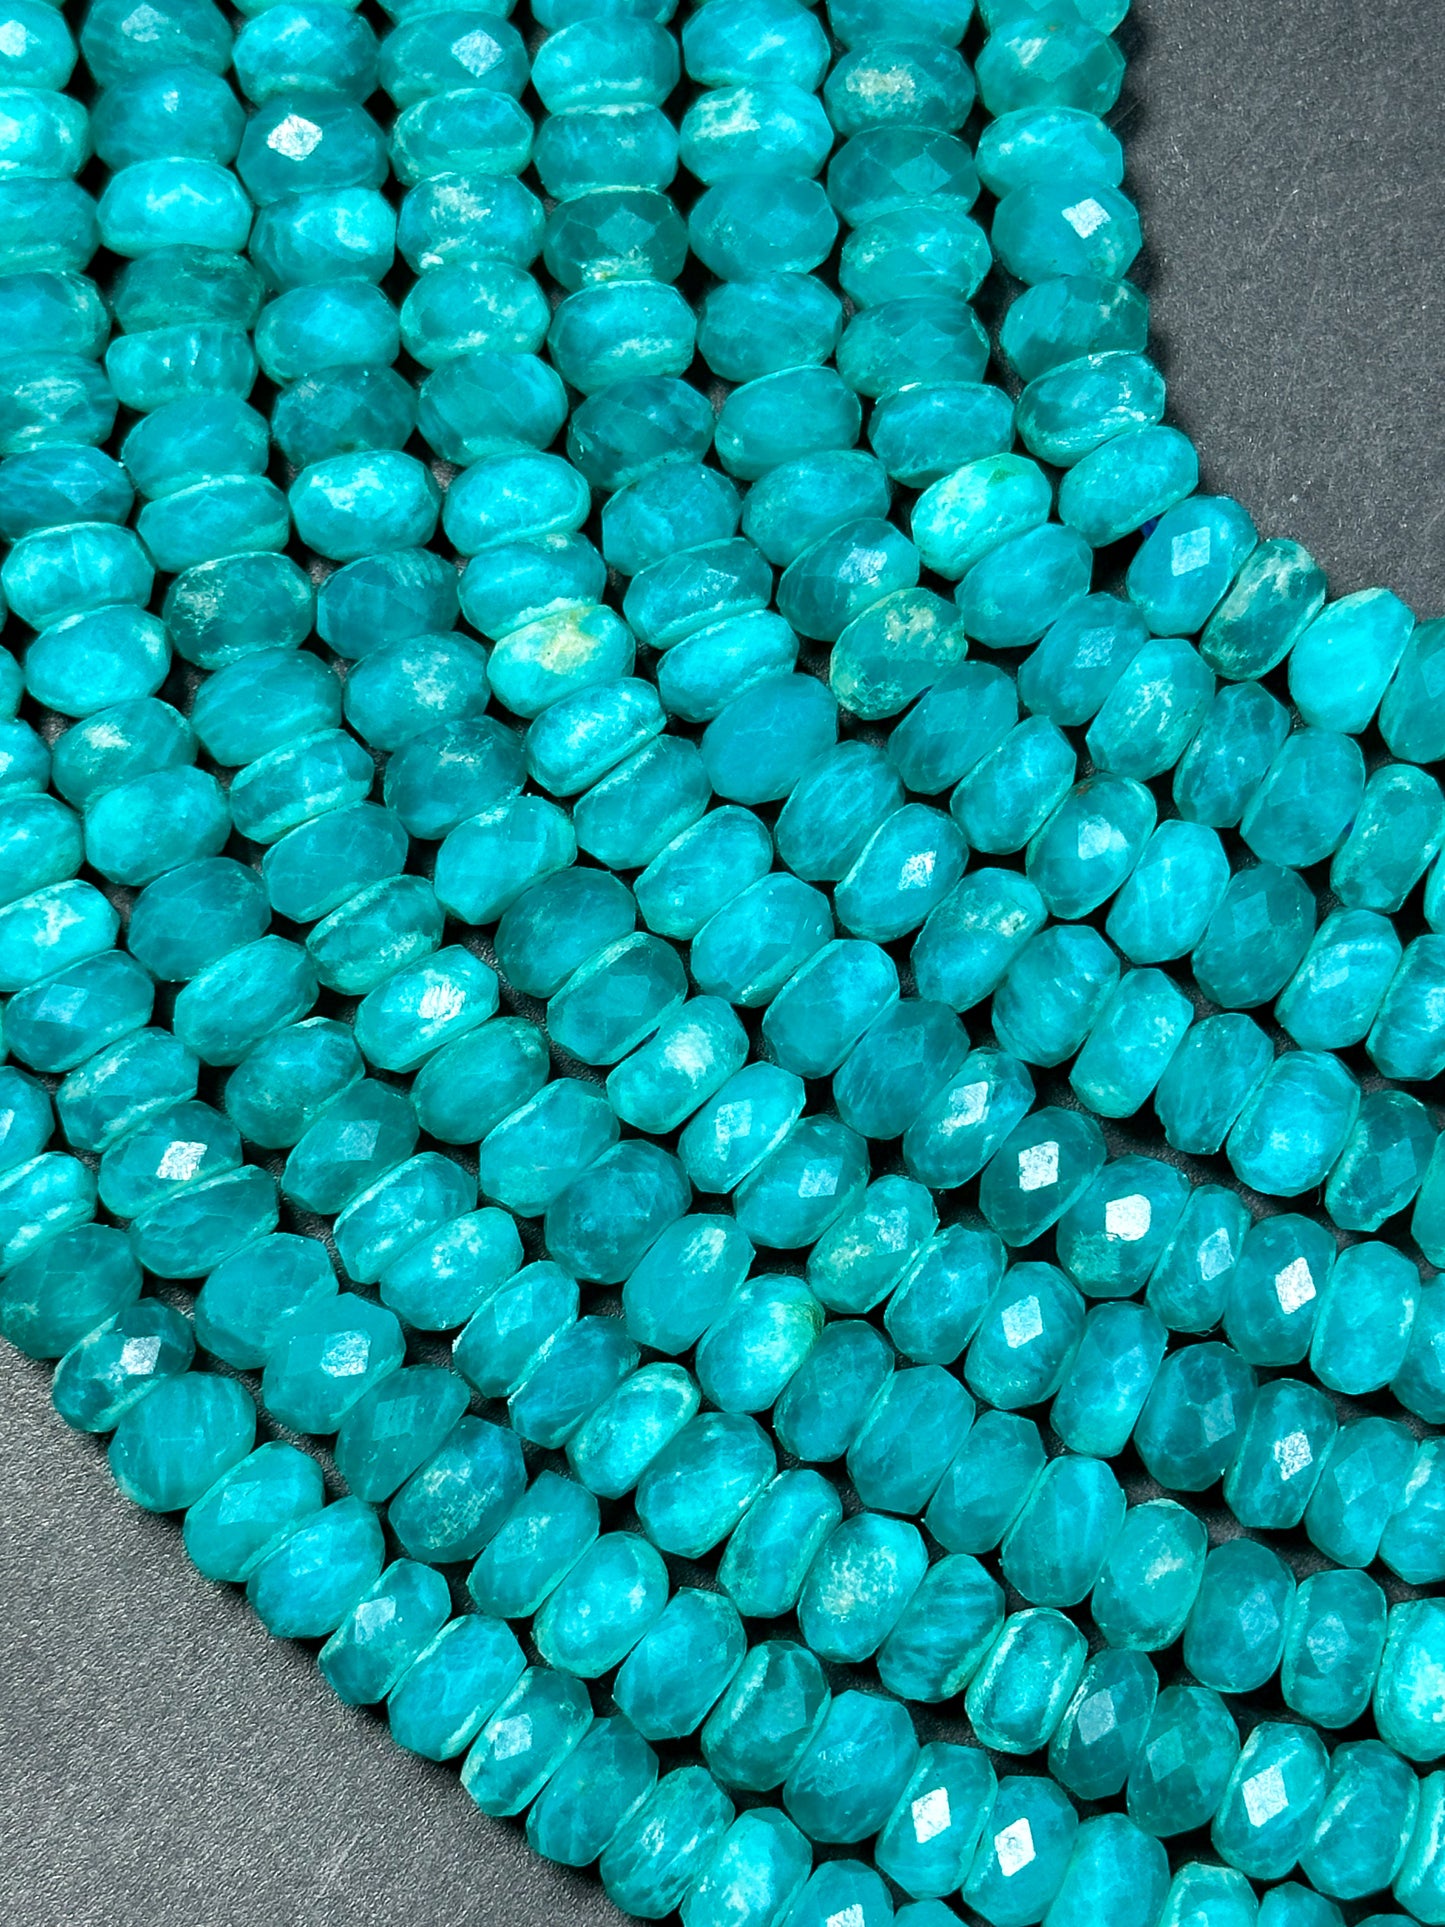 AA+ NATURAL Amazonite Gemstone Bead Faceted 6x4mm 8x5mm Rondelle Shape, Gorgeous Green Blue Color Amazonite Gemstone Bead Full Strand 15.5"